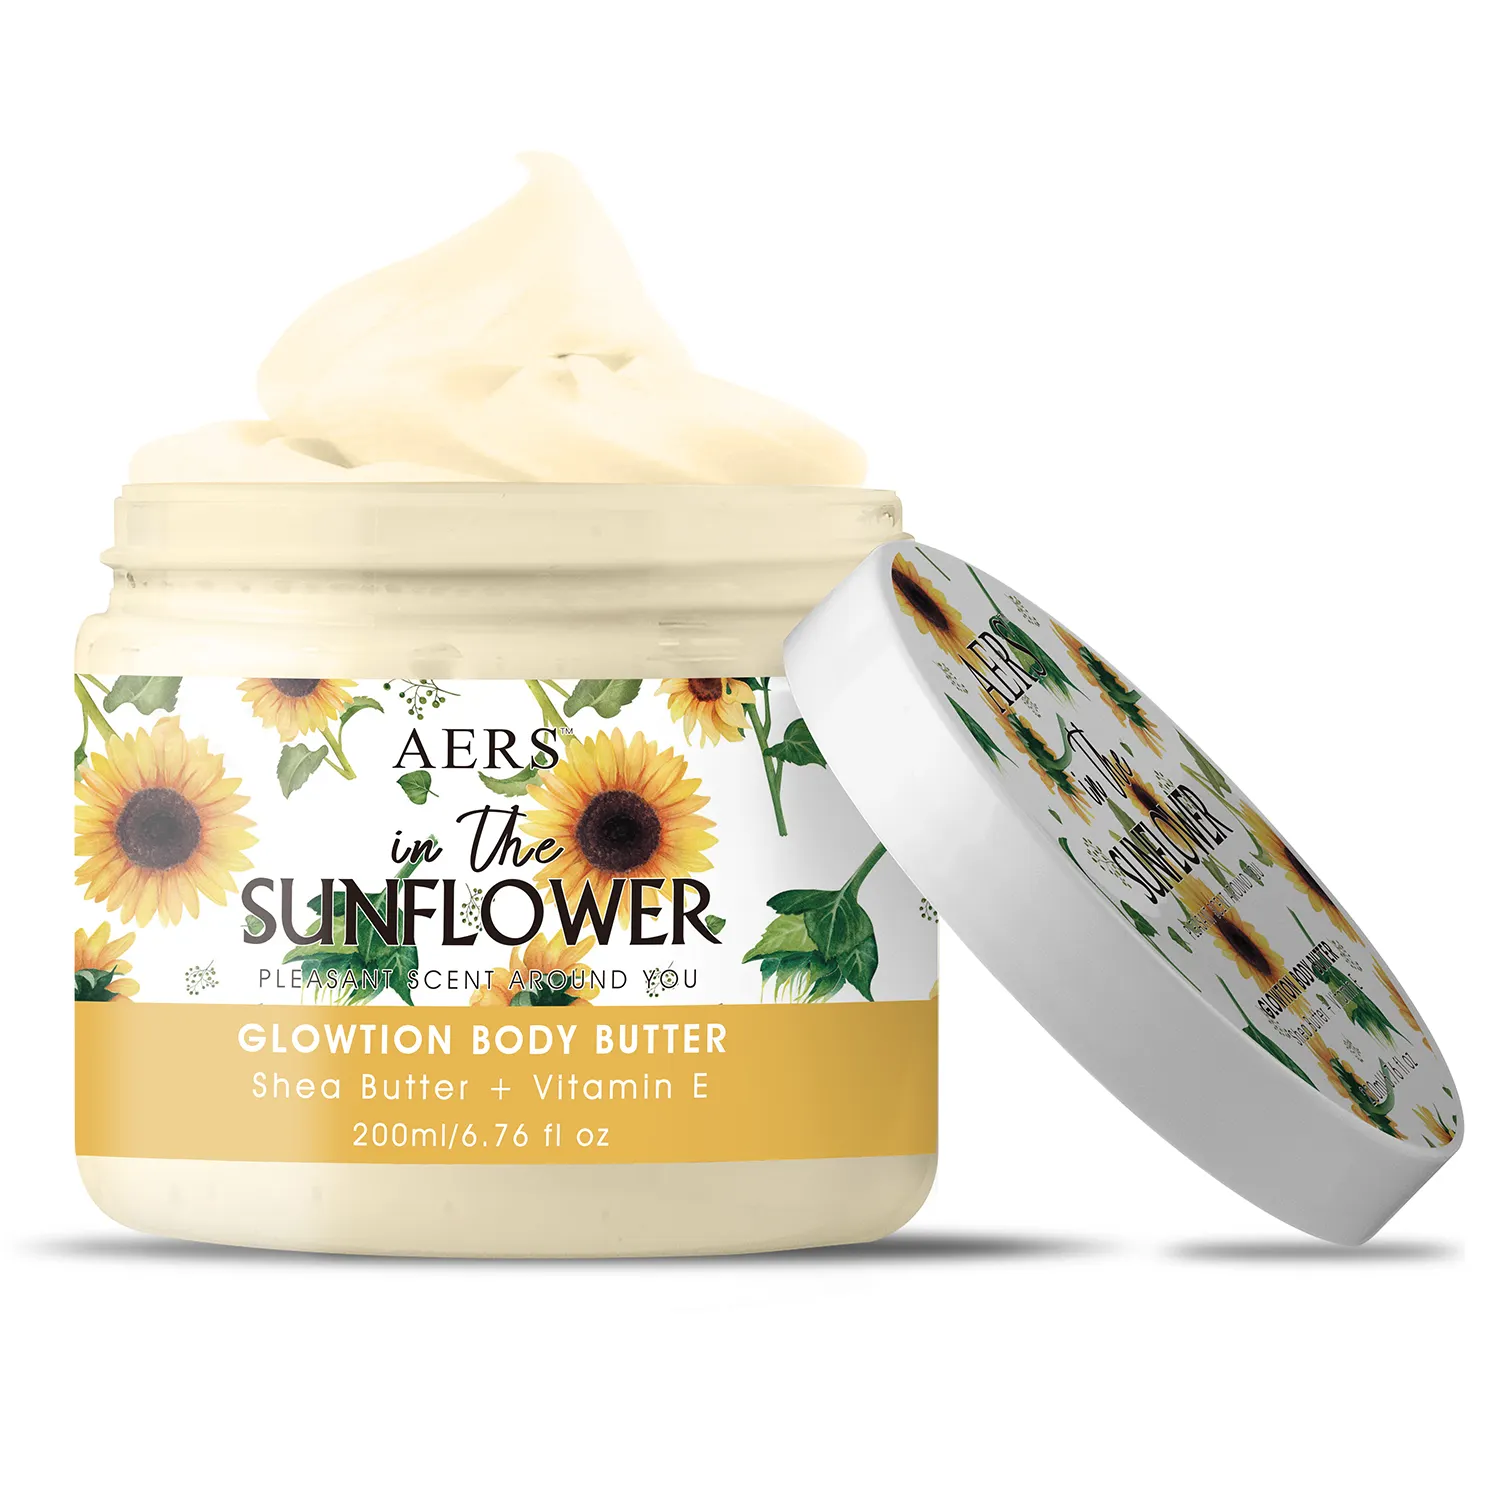 Brighten Moisturizing Plant Extract Shea Butter Sunflower Lotion Skin Beauty High Quality Body Cream